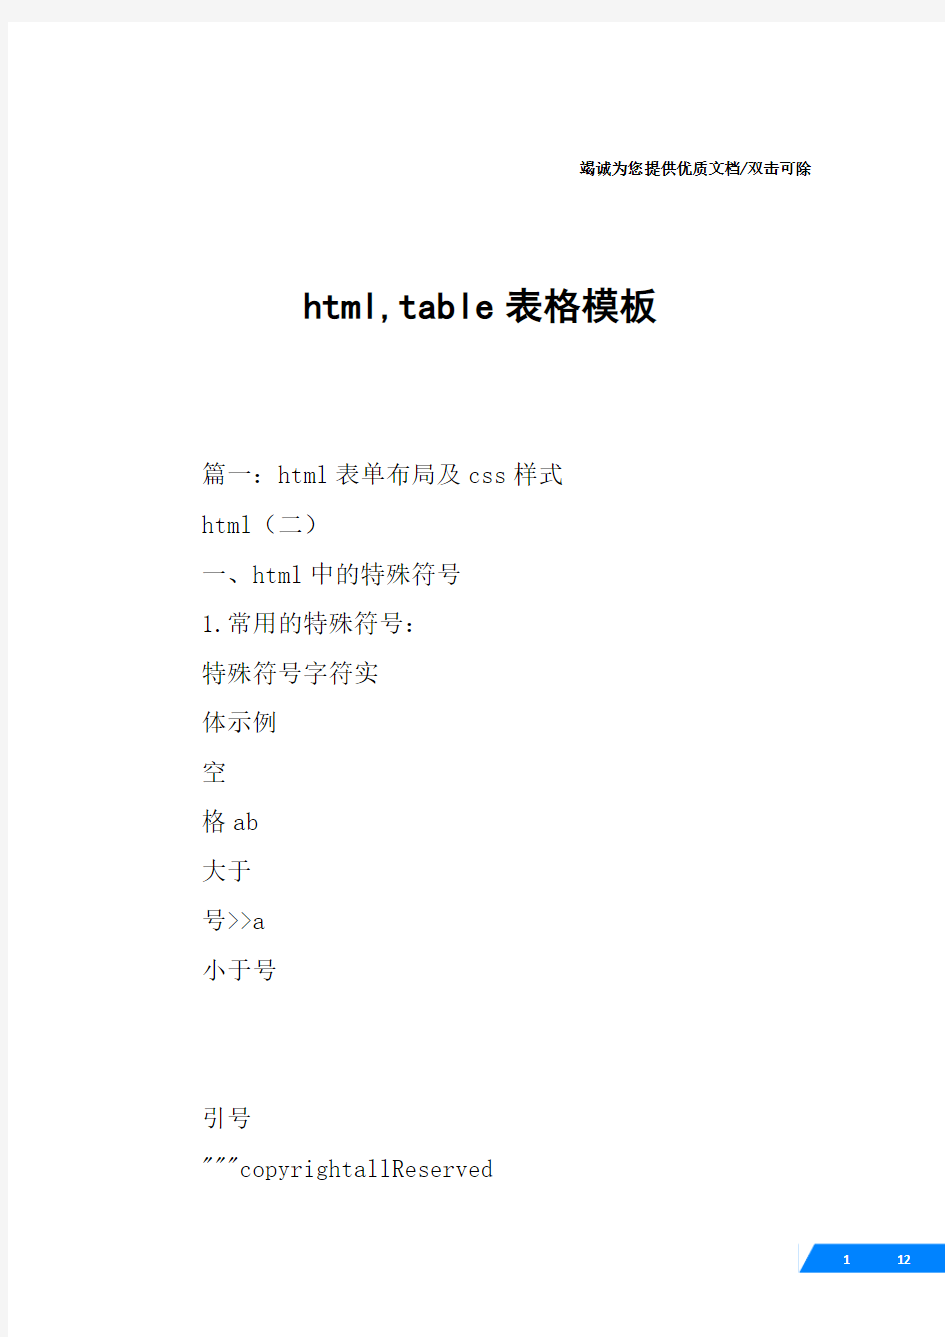 html,table表格模板